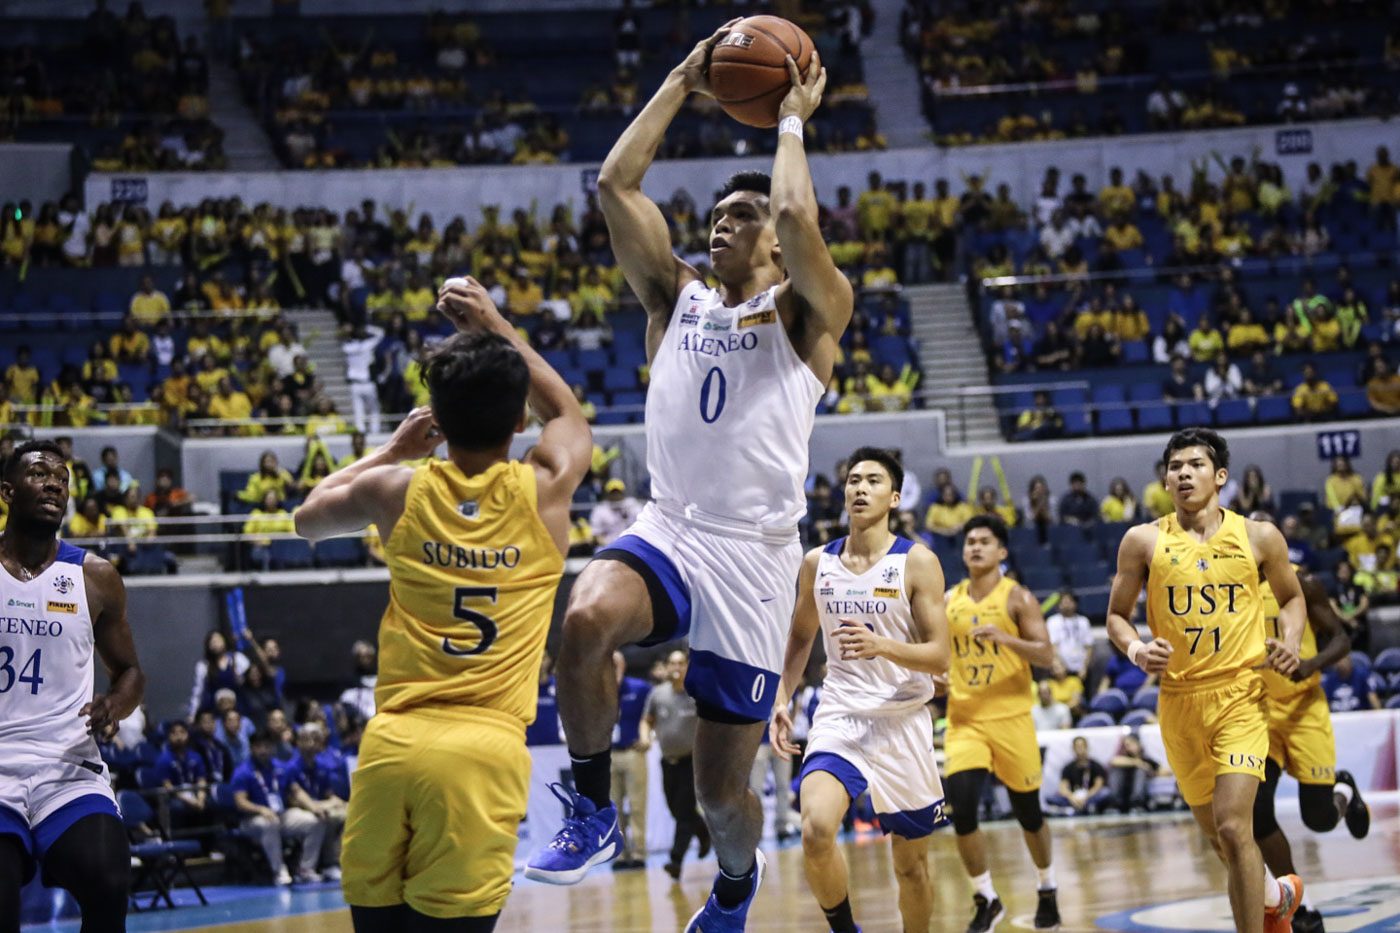 Still unstoppable: Ateneo shuts down UST as Ravena catches fire